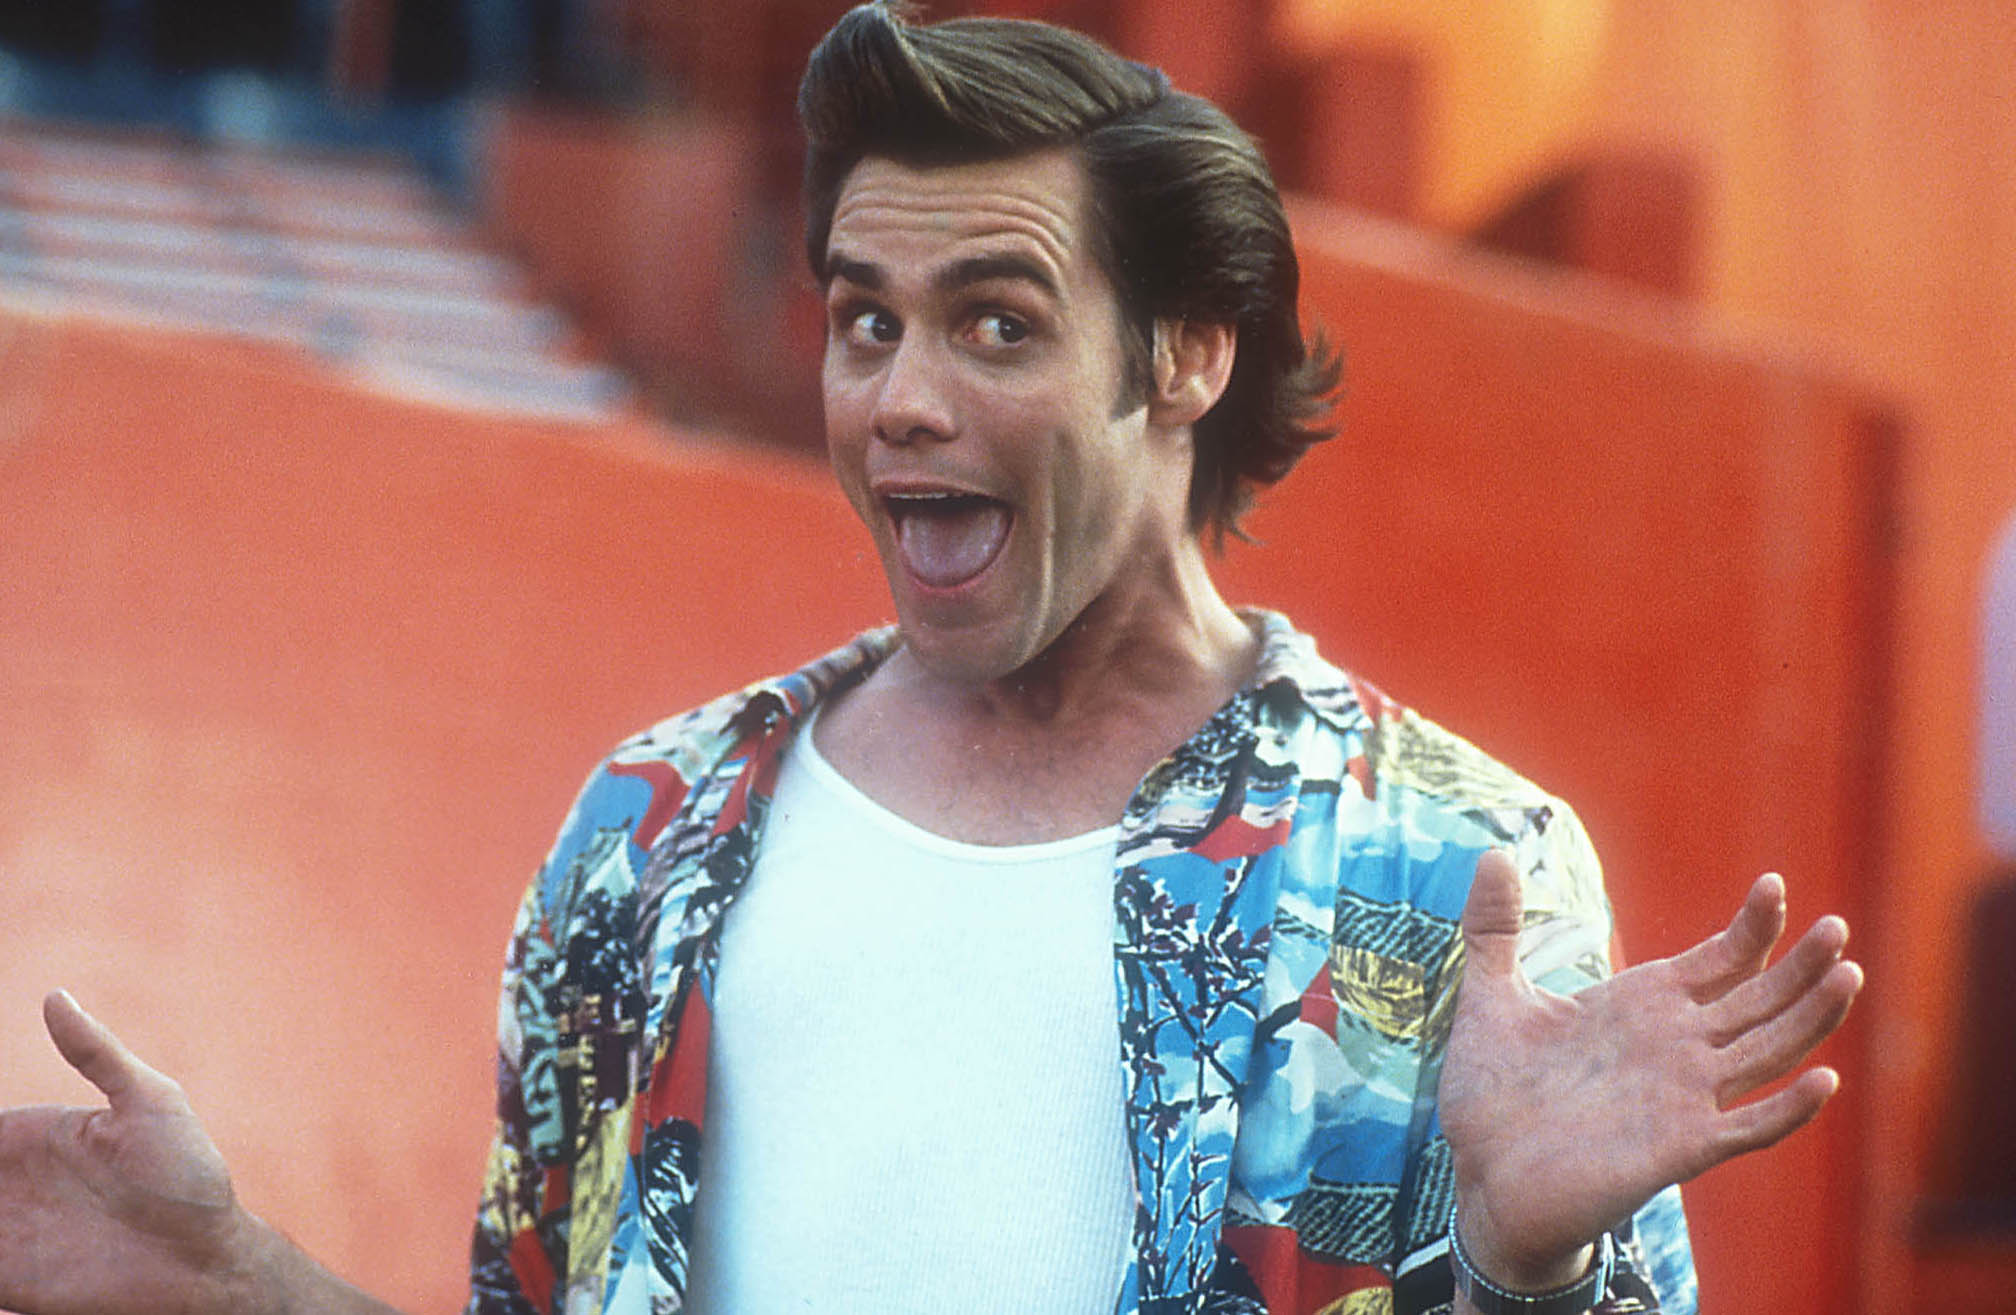 Jim Carrey's Transformation: From Ace Ventura to Blue-Haired Eccentric - wide 3